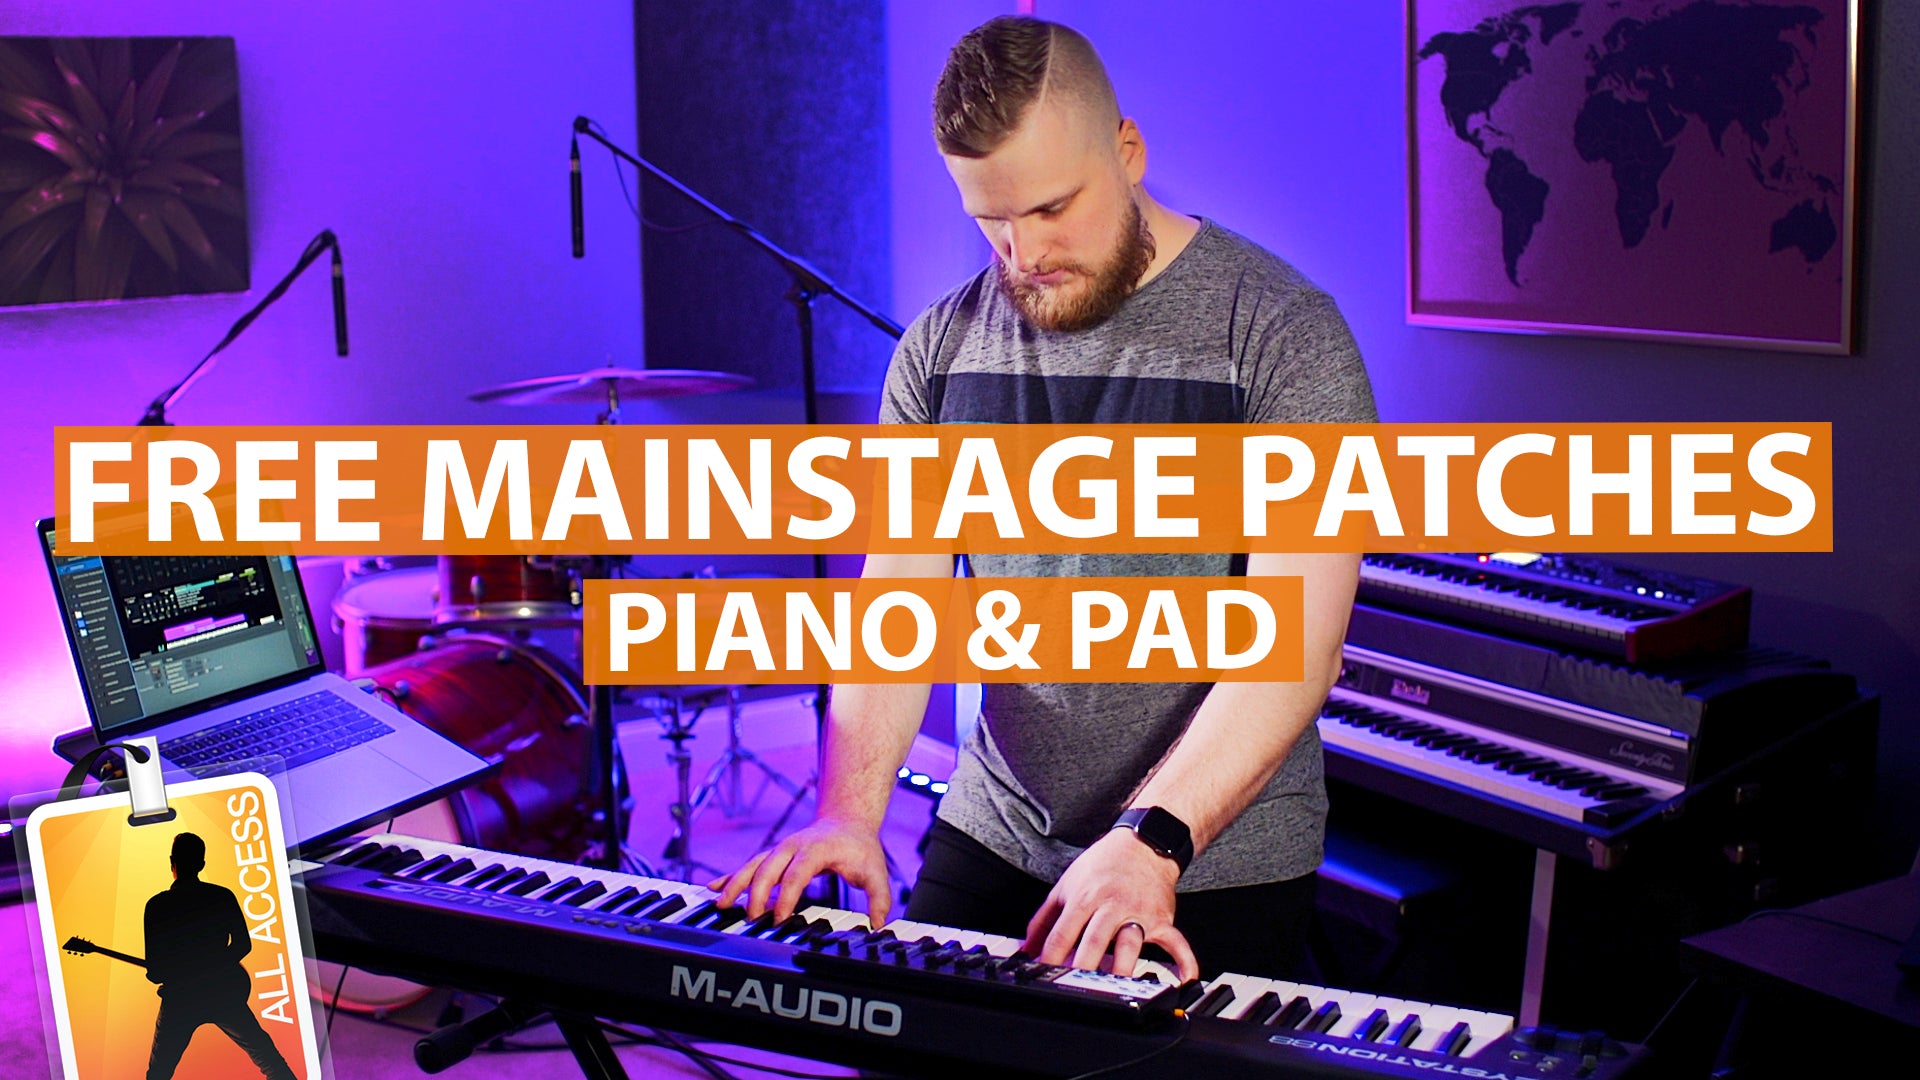 Free MainStage Patches Demo from Sunday Sounds